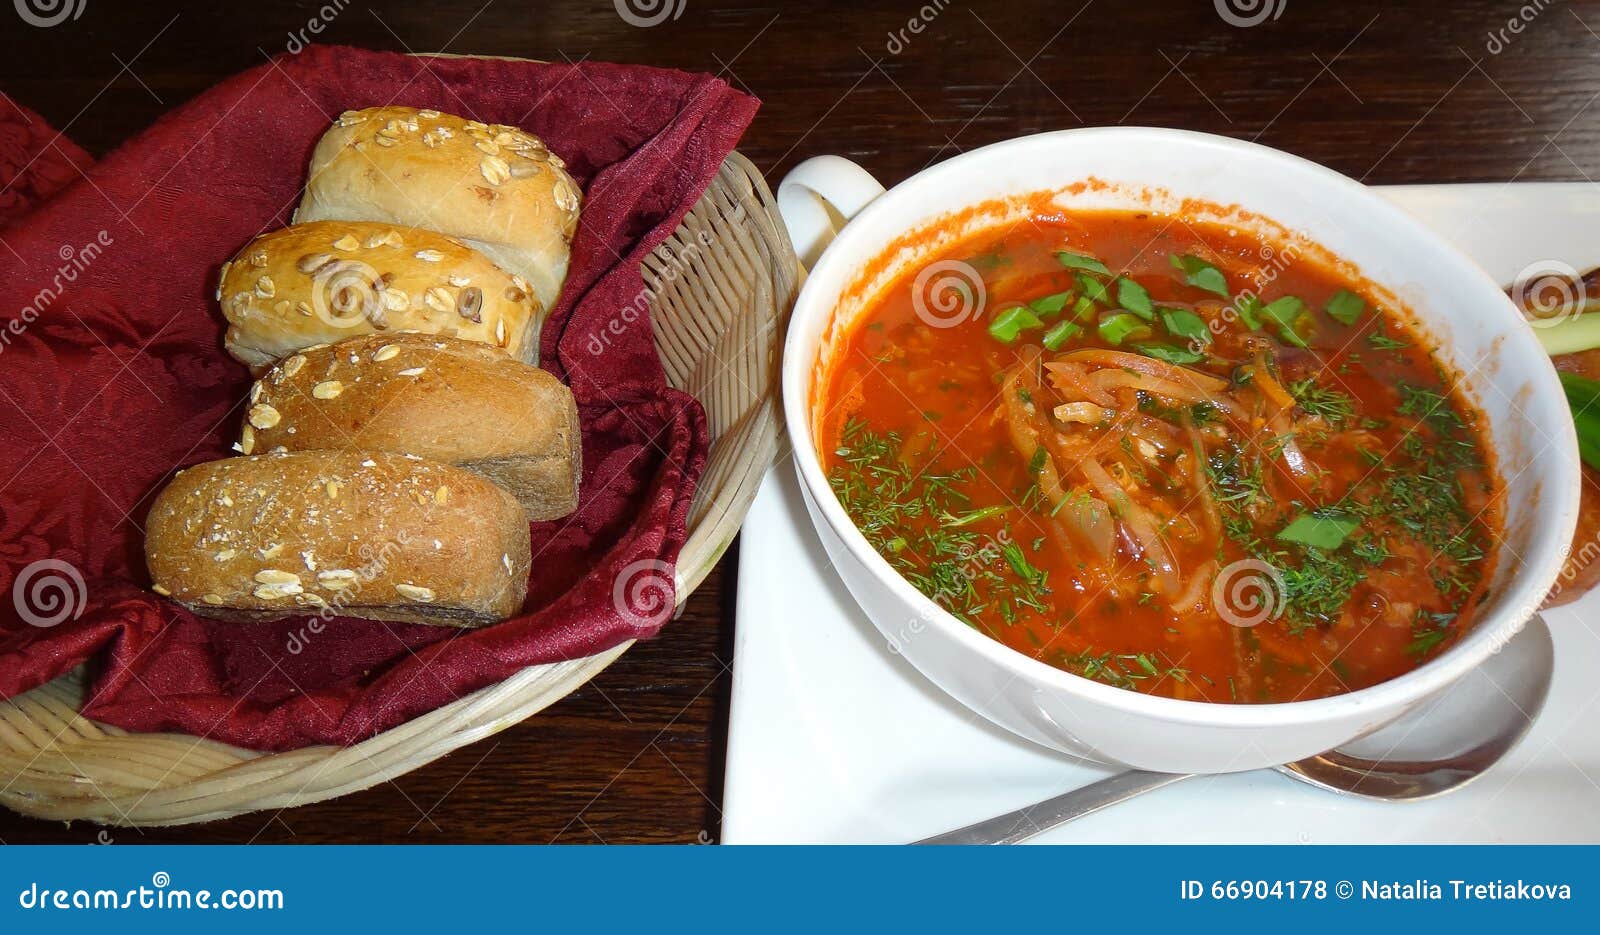 Borsch with donuts. stock photo. Image of cabbage, borshch - 66904178